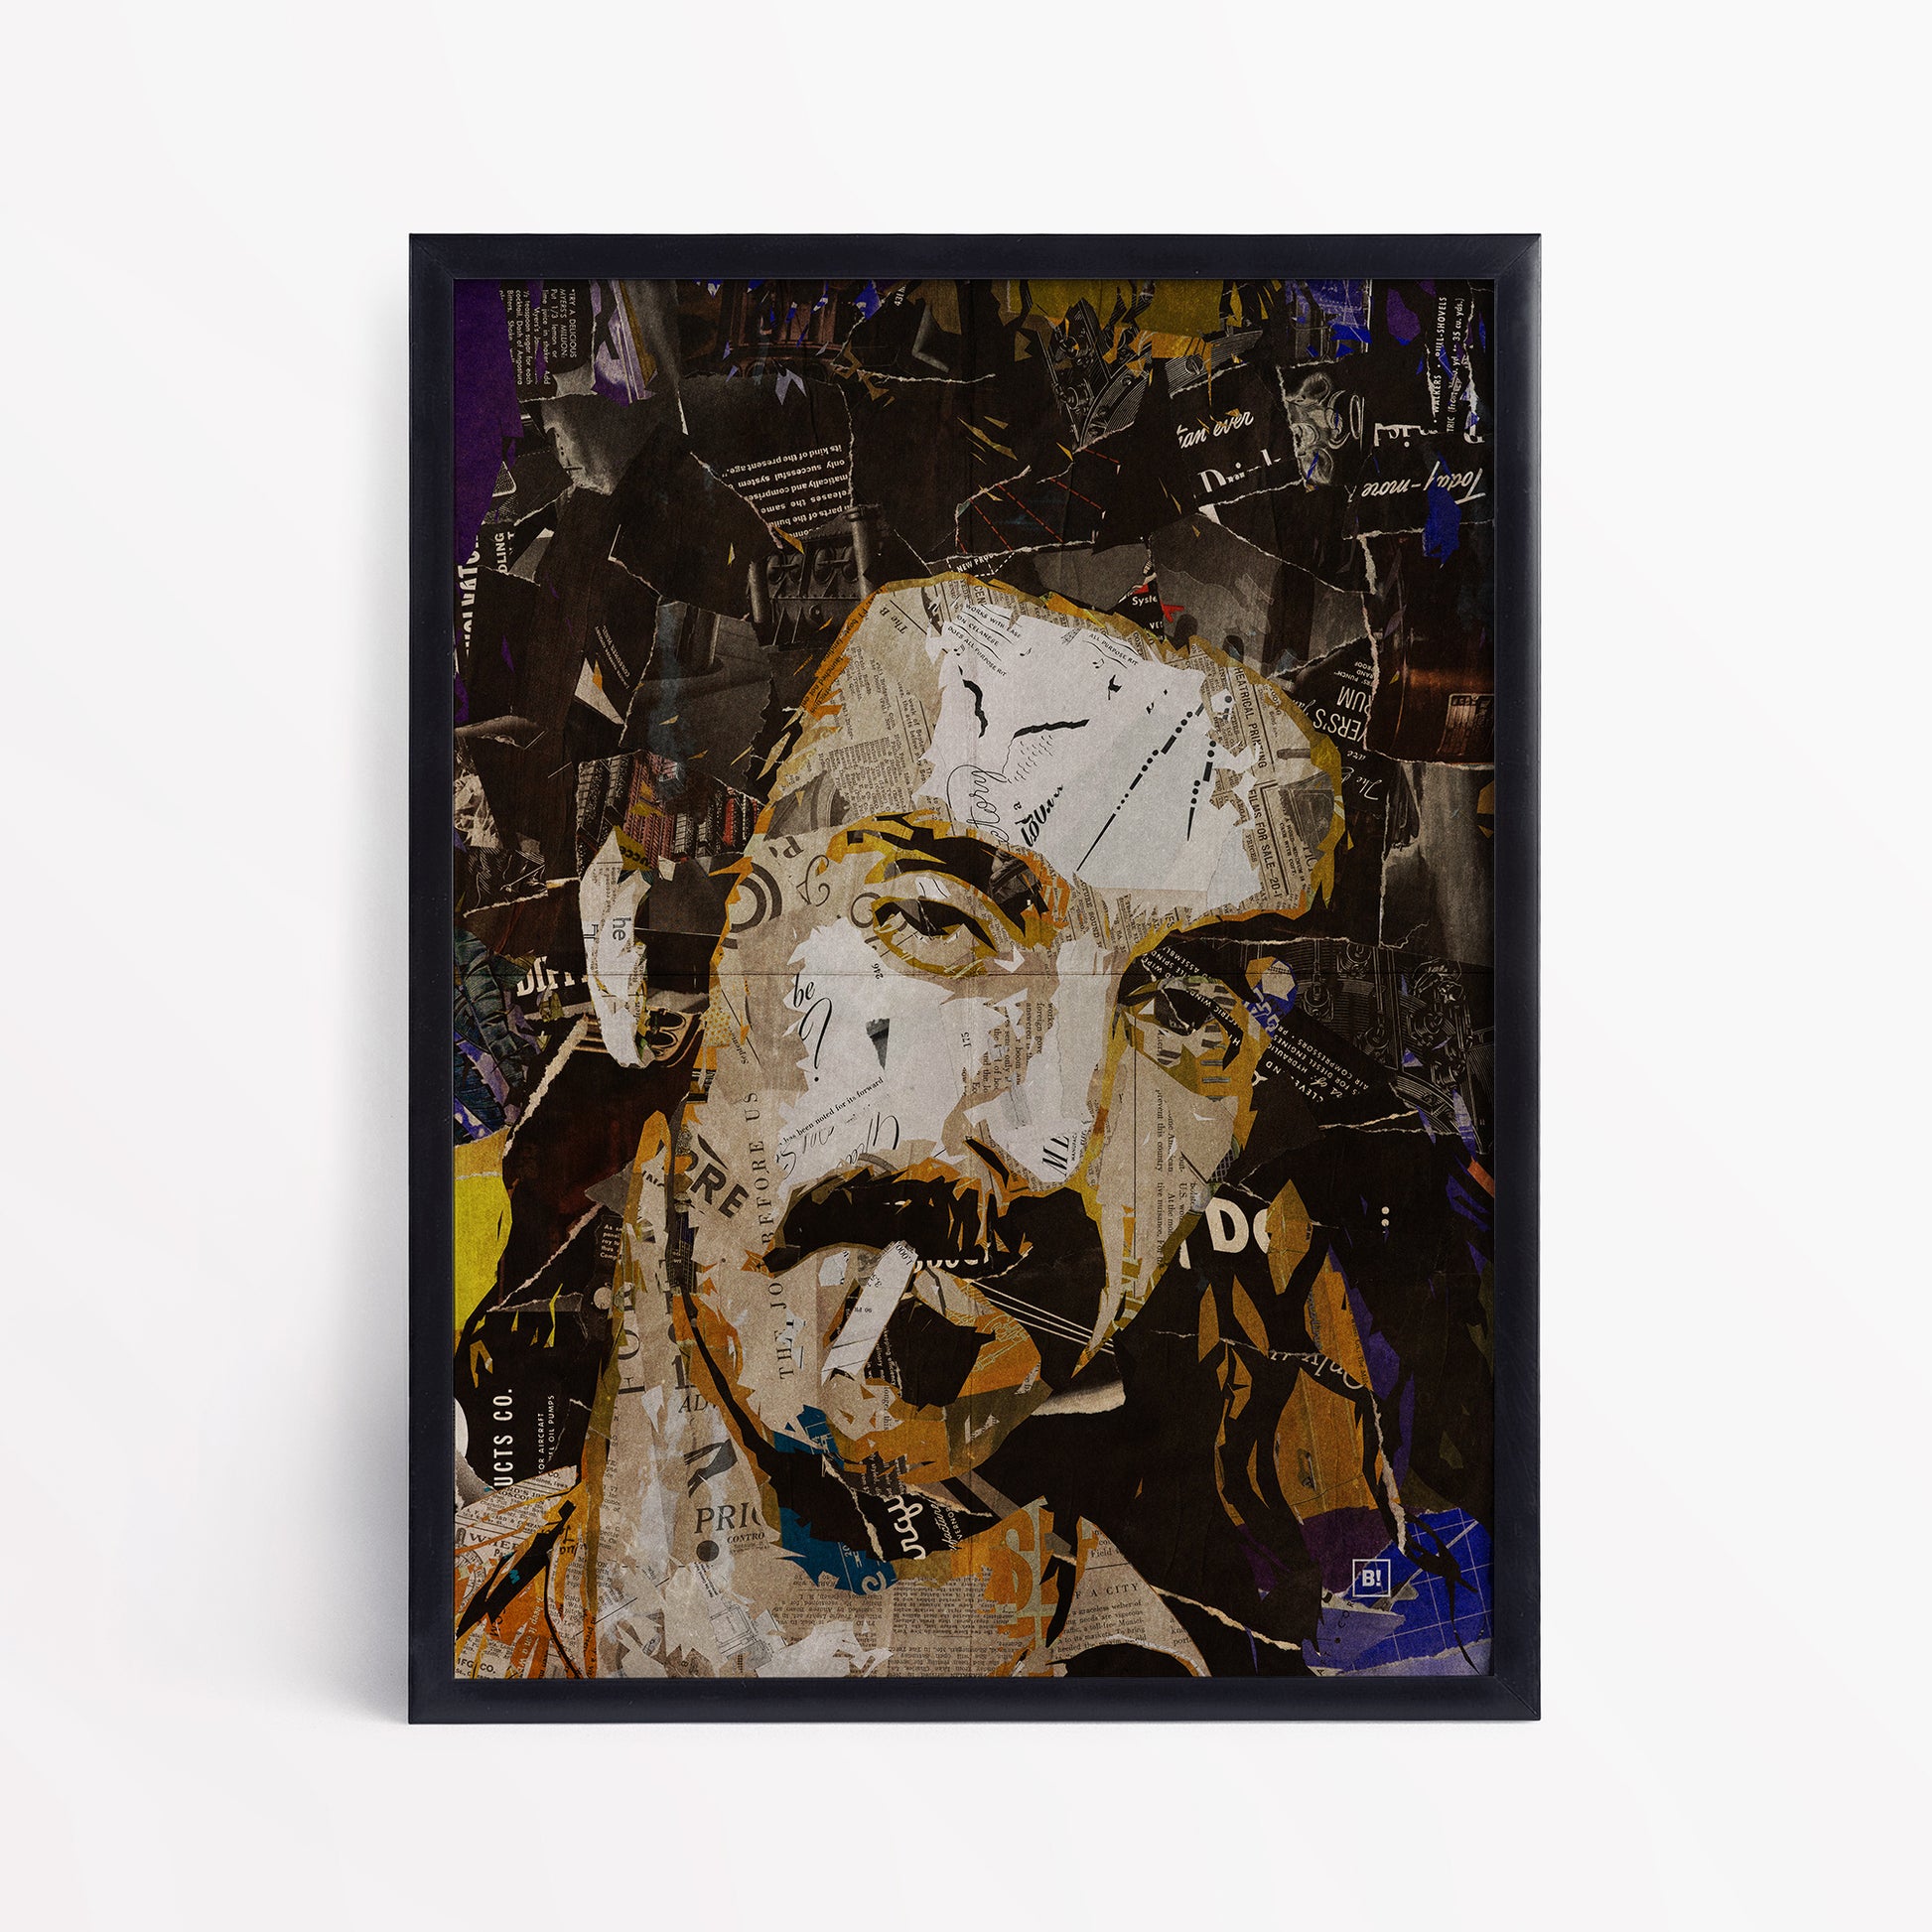 Be inspired by our iconic collage portrait art print of Frank Zappa. This artwork has been printed using the giclée process on archival acid-free paper and is presented in a sleek black frame, showcasing its timeless beauty in every detail.